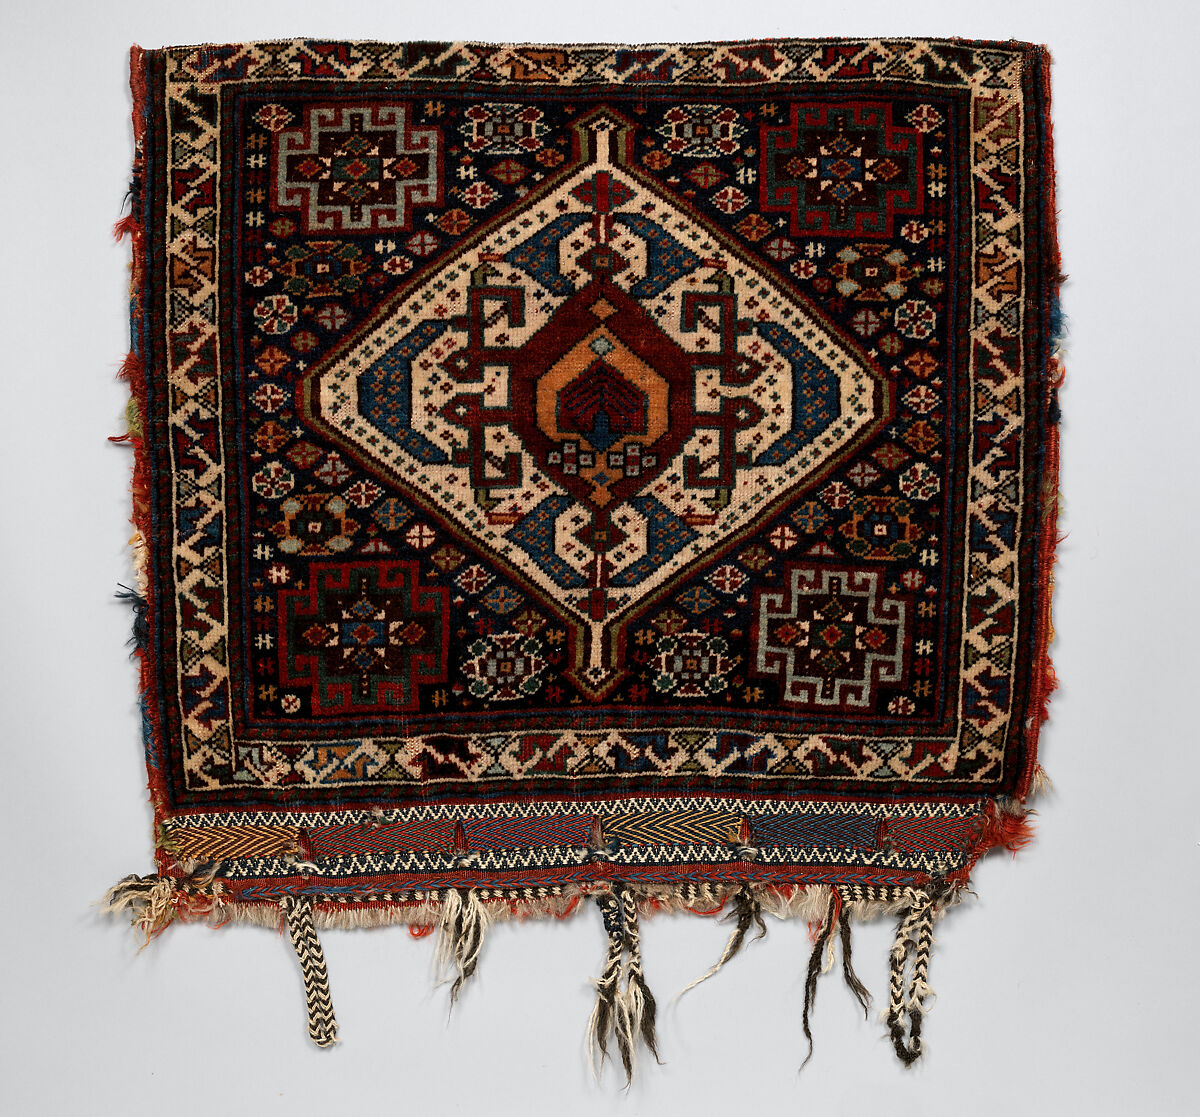 Half of Double Saddle Bag (Khorjin), Wool (pile, warp, and weft); asymmetrically knotted pile, tapestry weave, brocaded with wool and cotton 